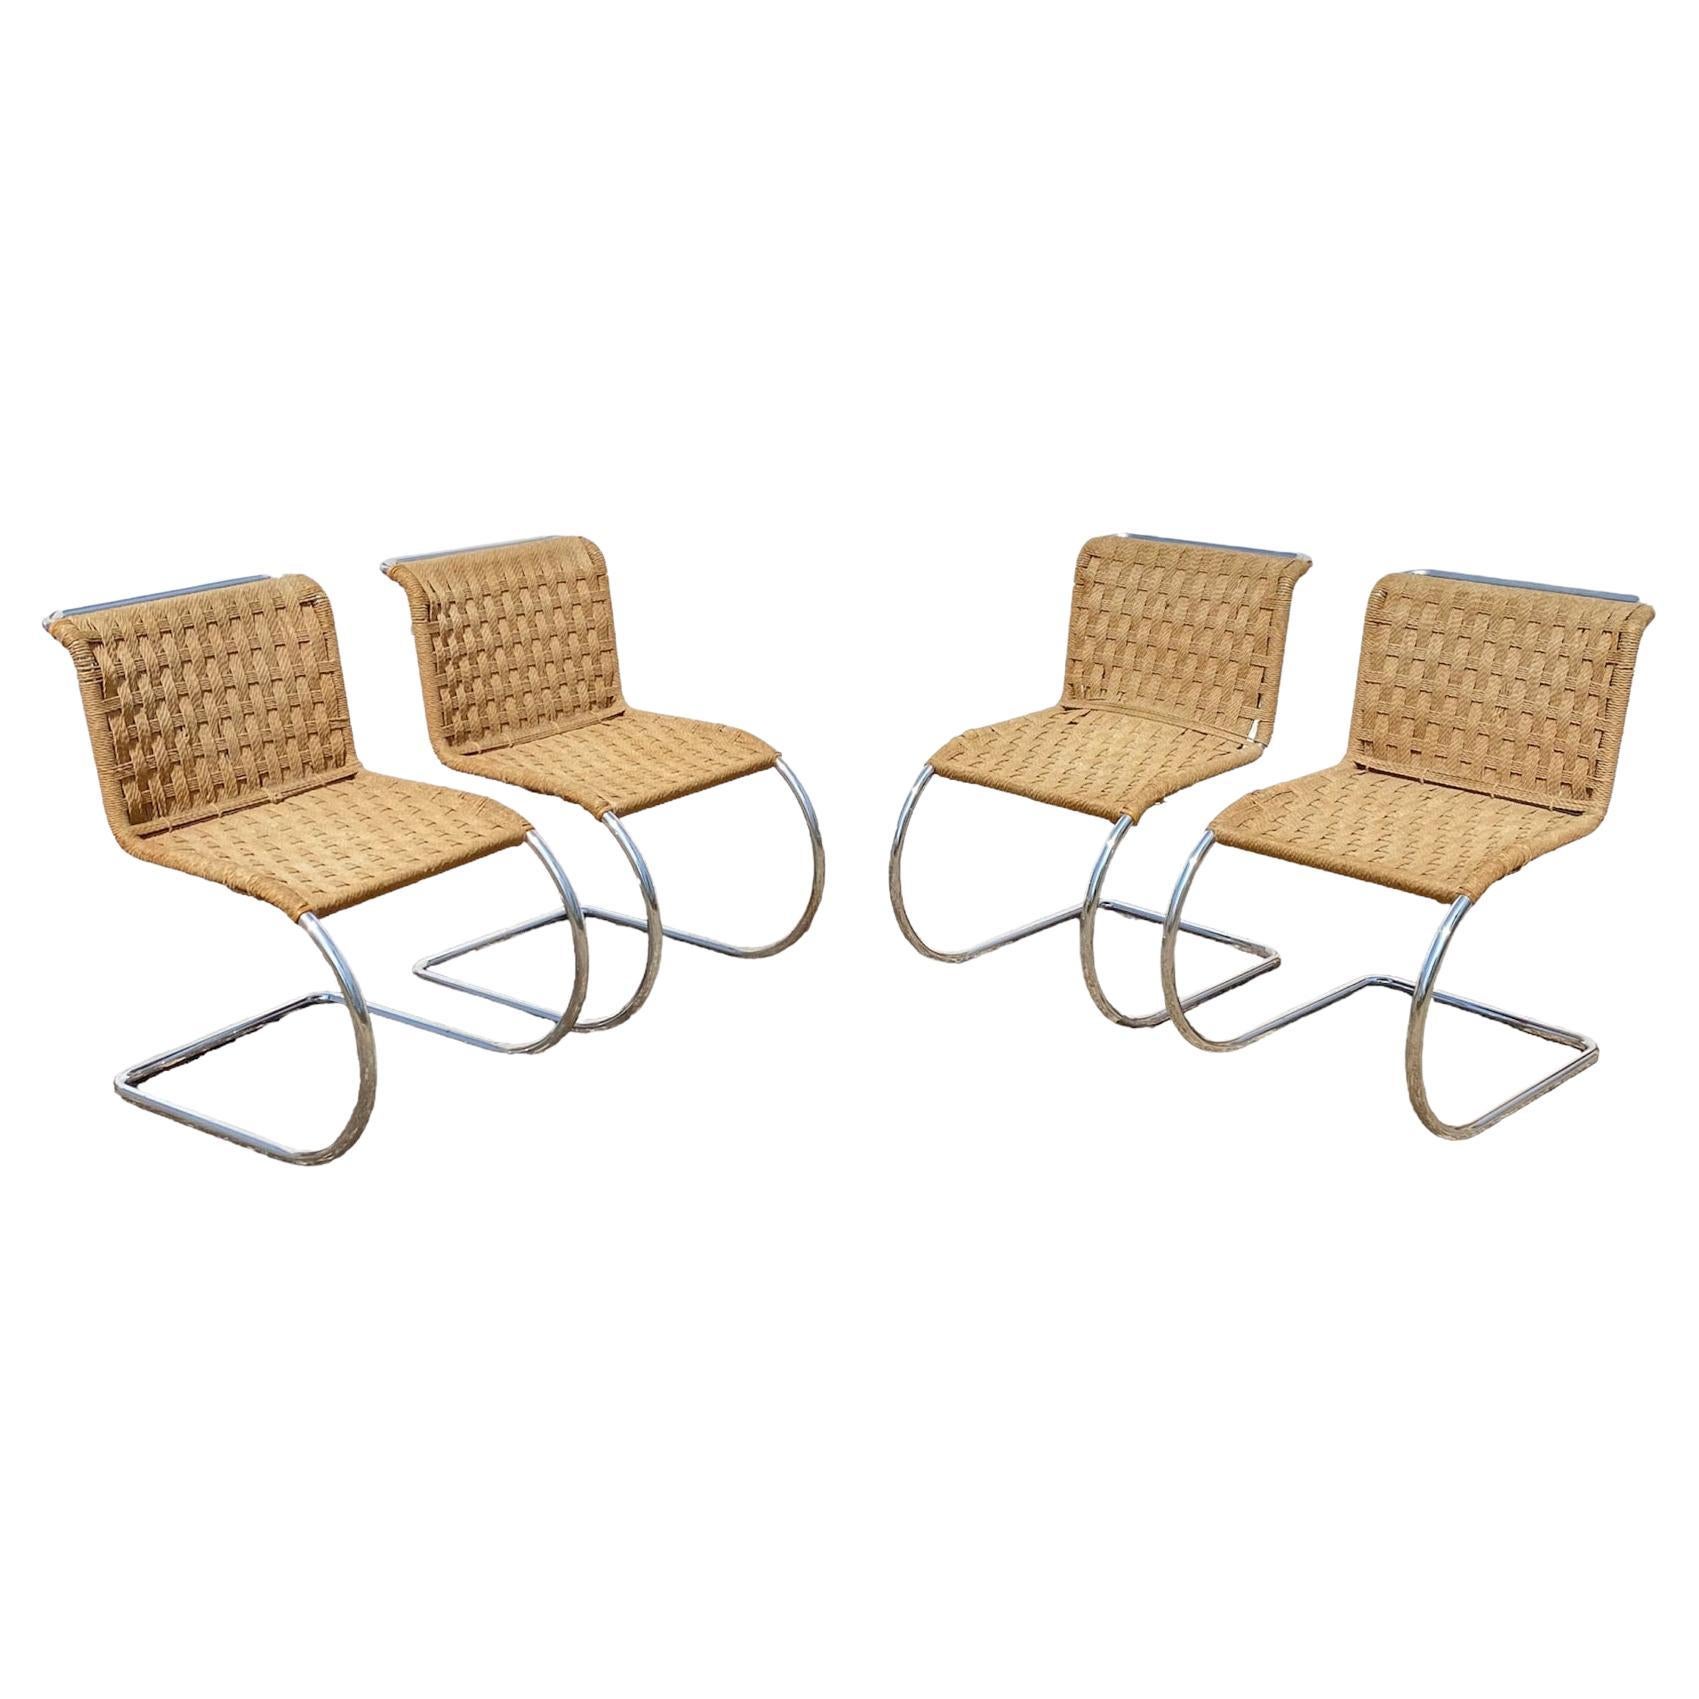 Set of 4 "Mr10" Chairs Designed by Mies Van Der Rohe, 1960s